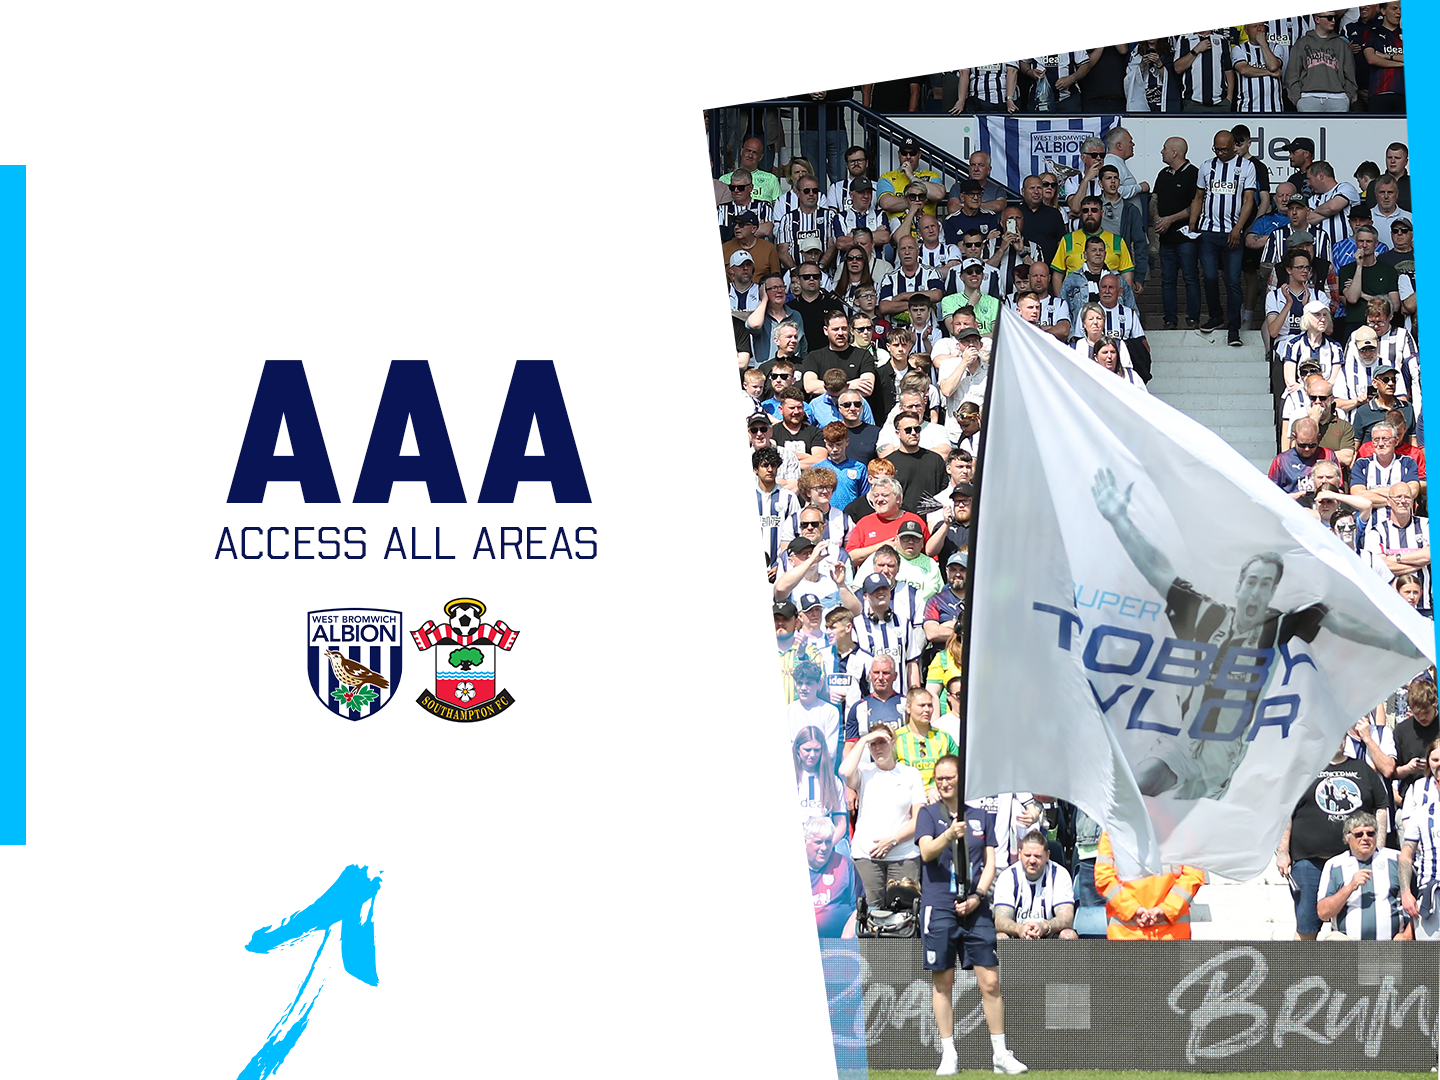 An Access All Areas graphic, showing a photo of Albion fans, as well as the clubs crests of the Baggies and Southampton